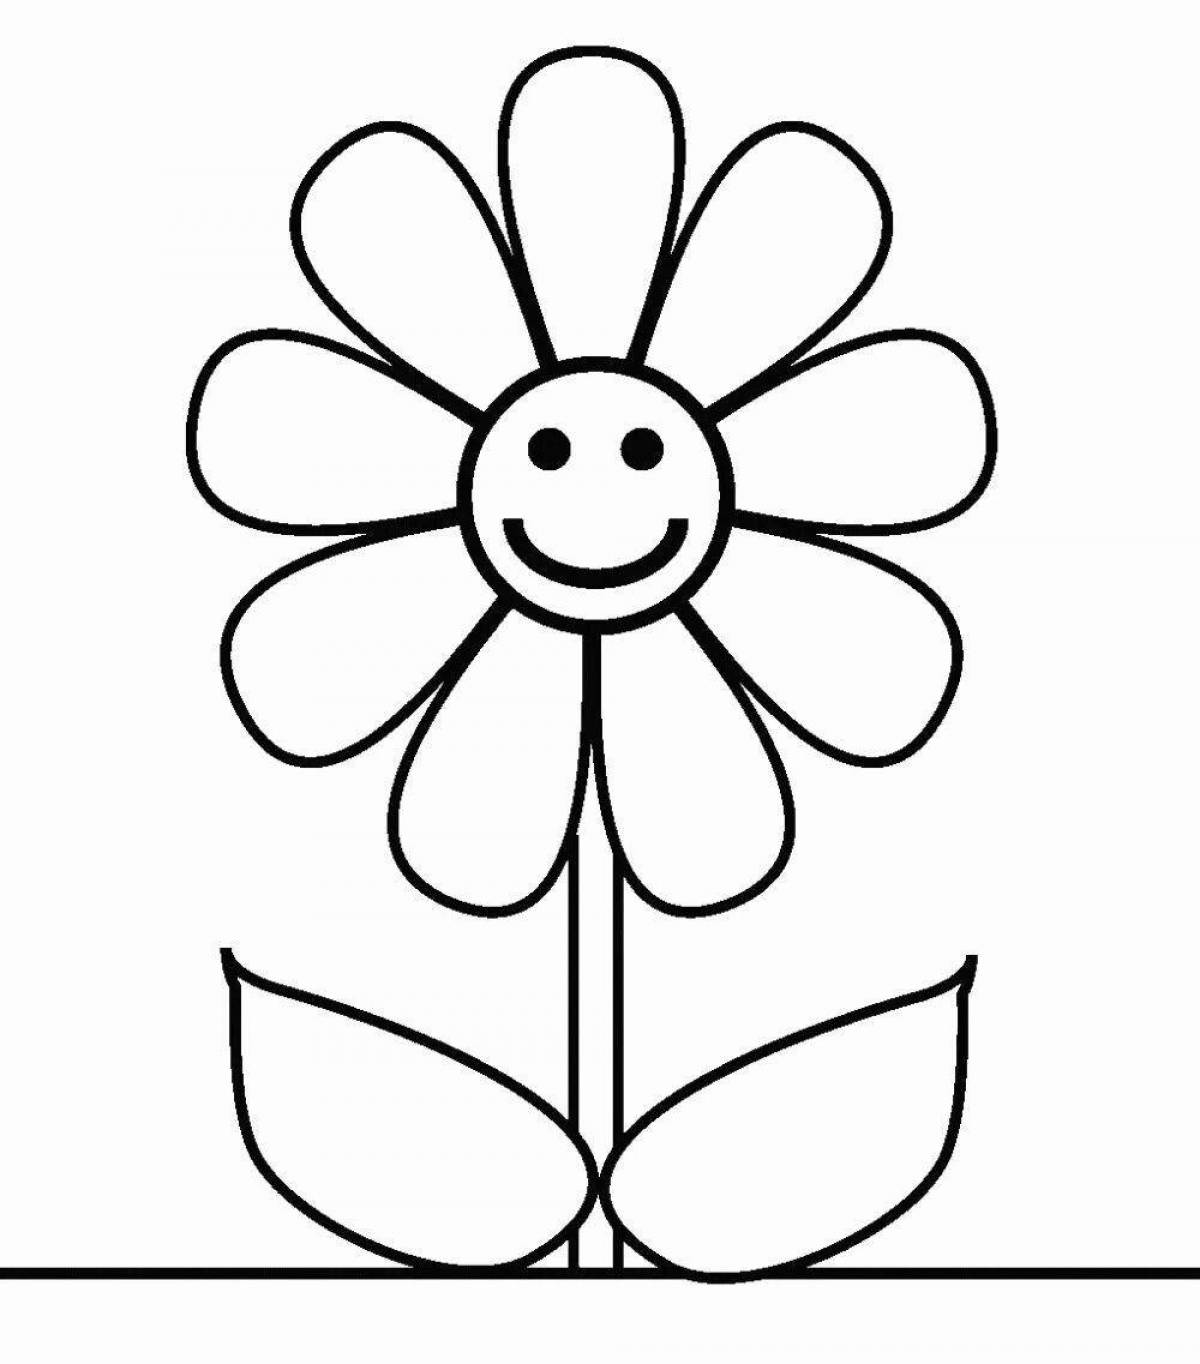 Fabulous flower coloring pages for 2-3 year olds